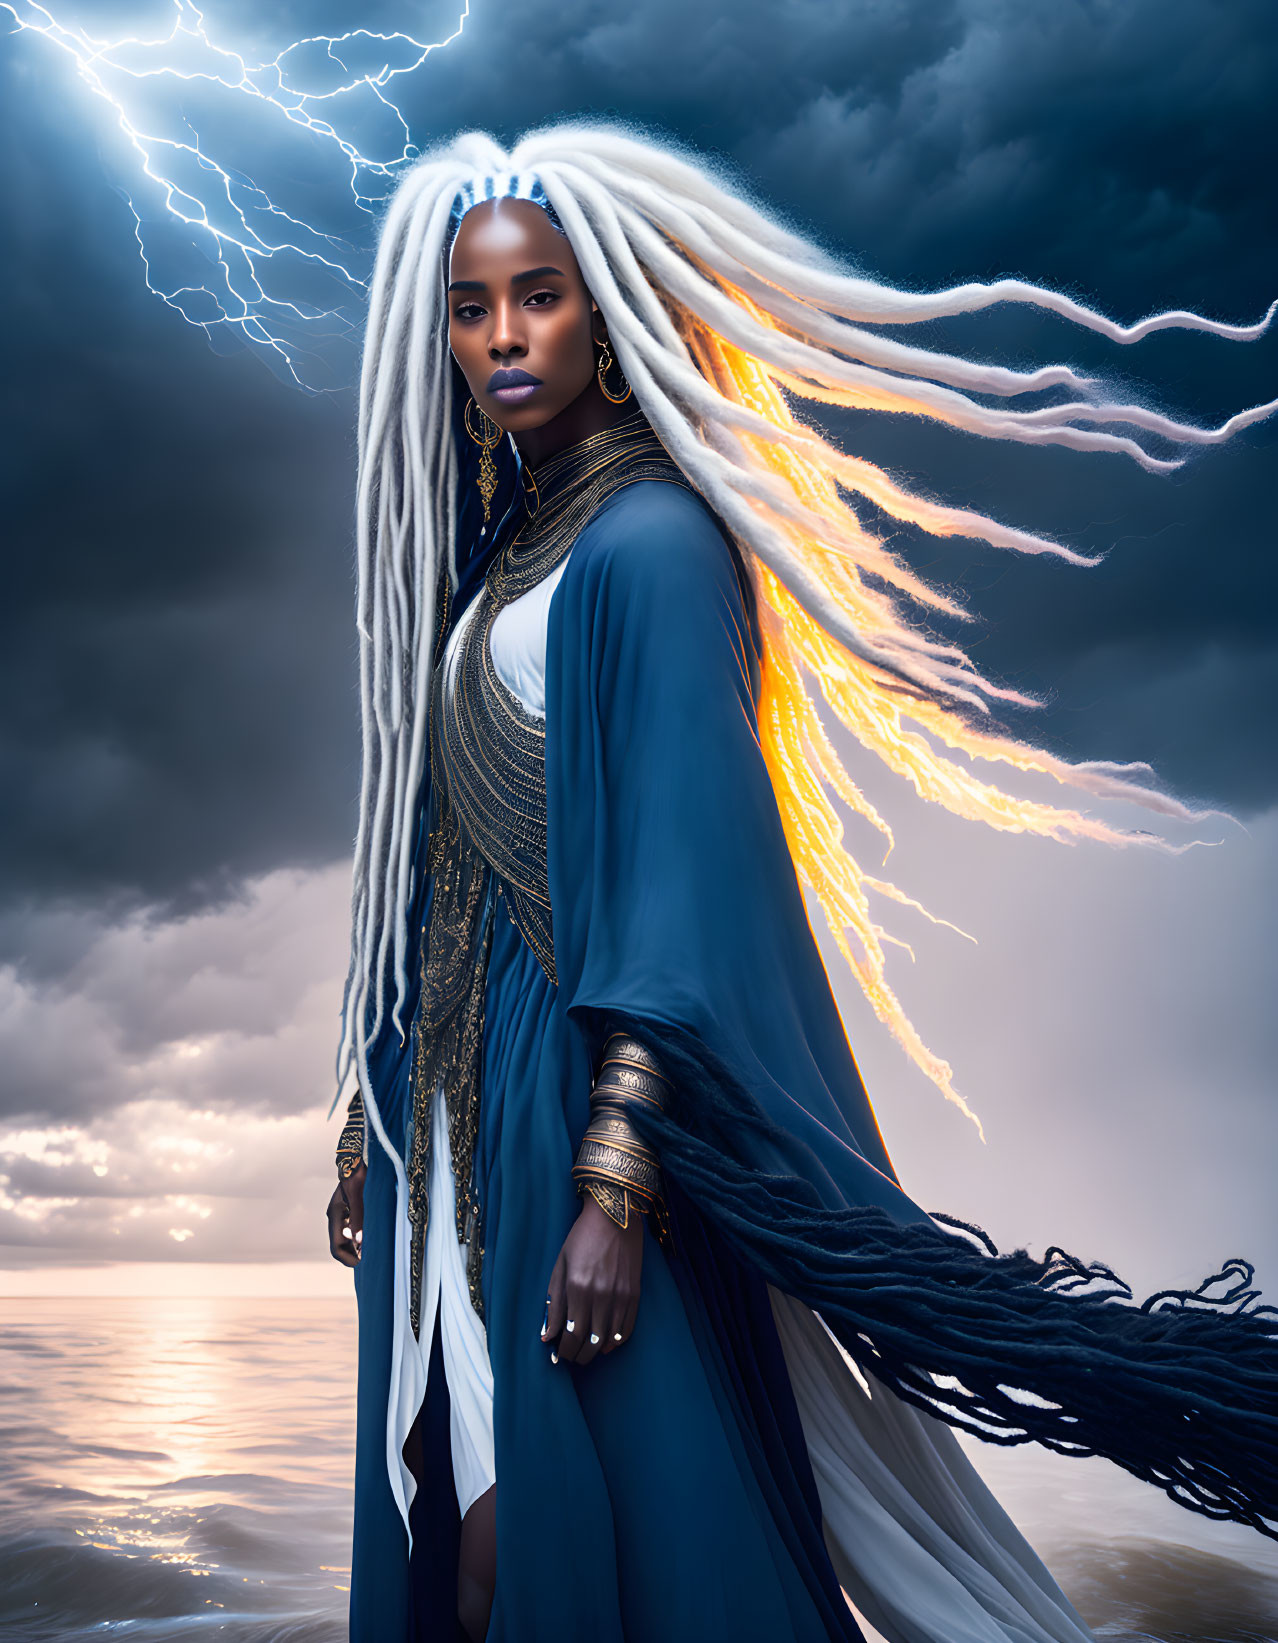 White-haired figure in blue robe amid stormy backdrop with lightning strikes